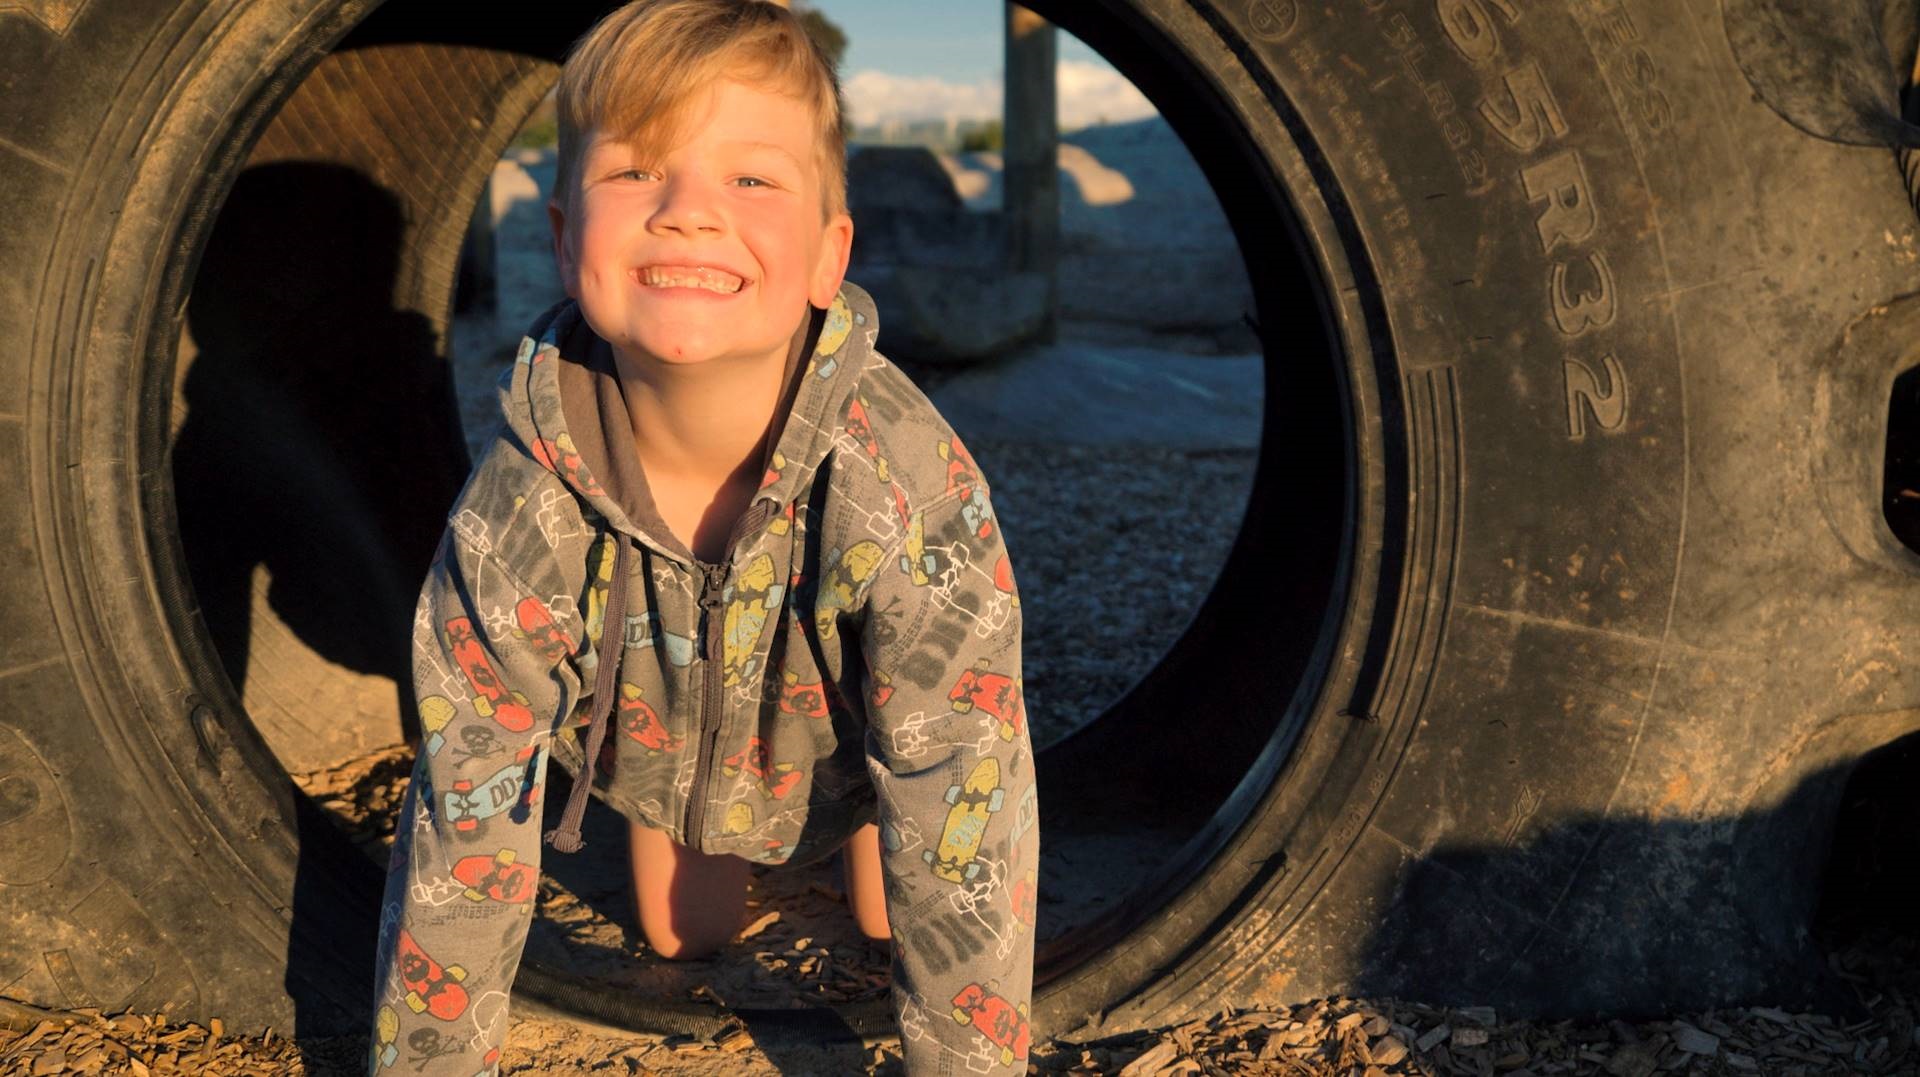 Grinning boy crawls through a tyre in the playground.